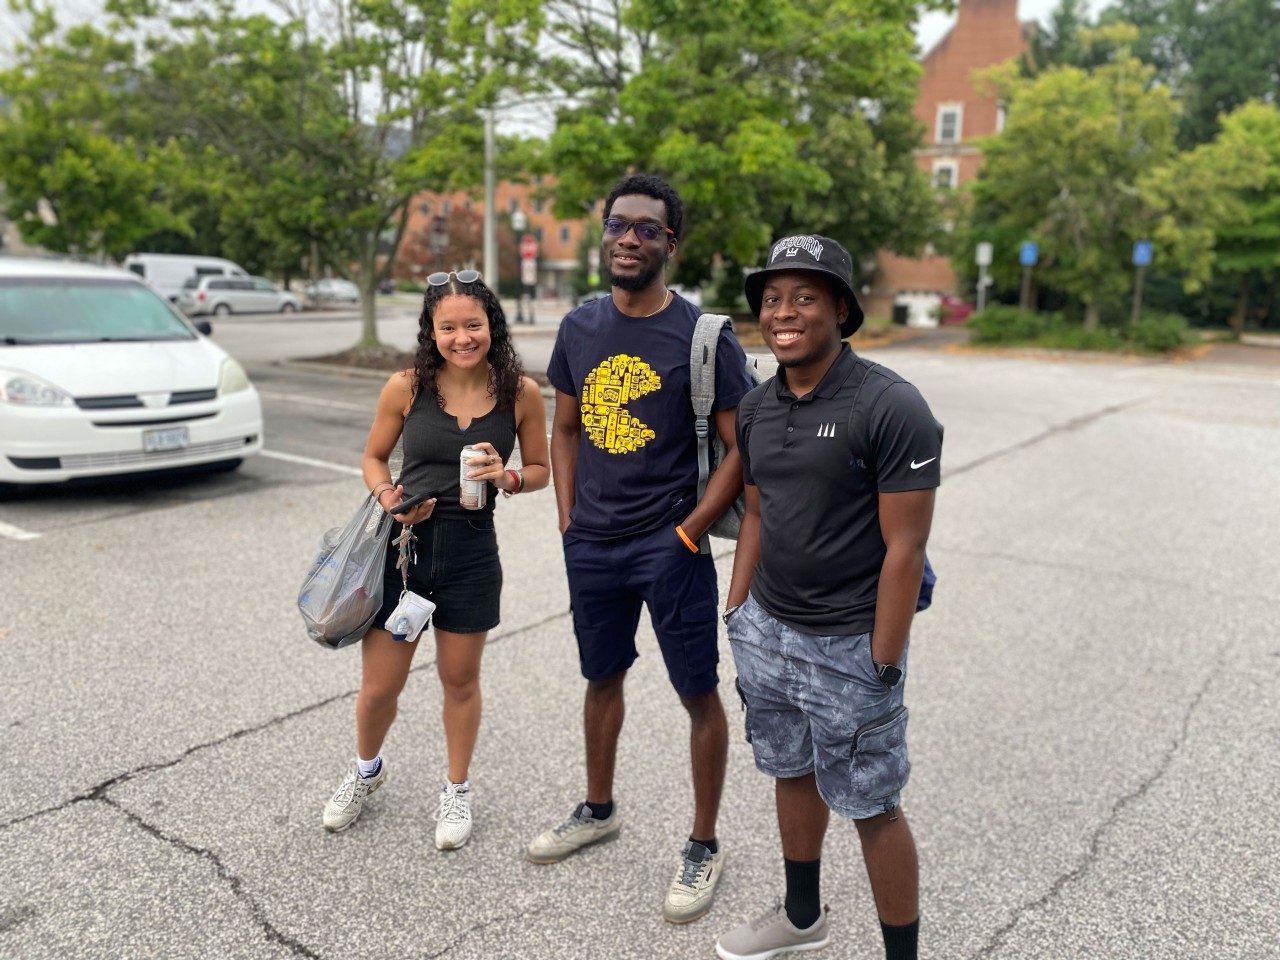 three students pose together and smile at the camera in a parking lot